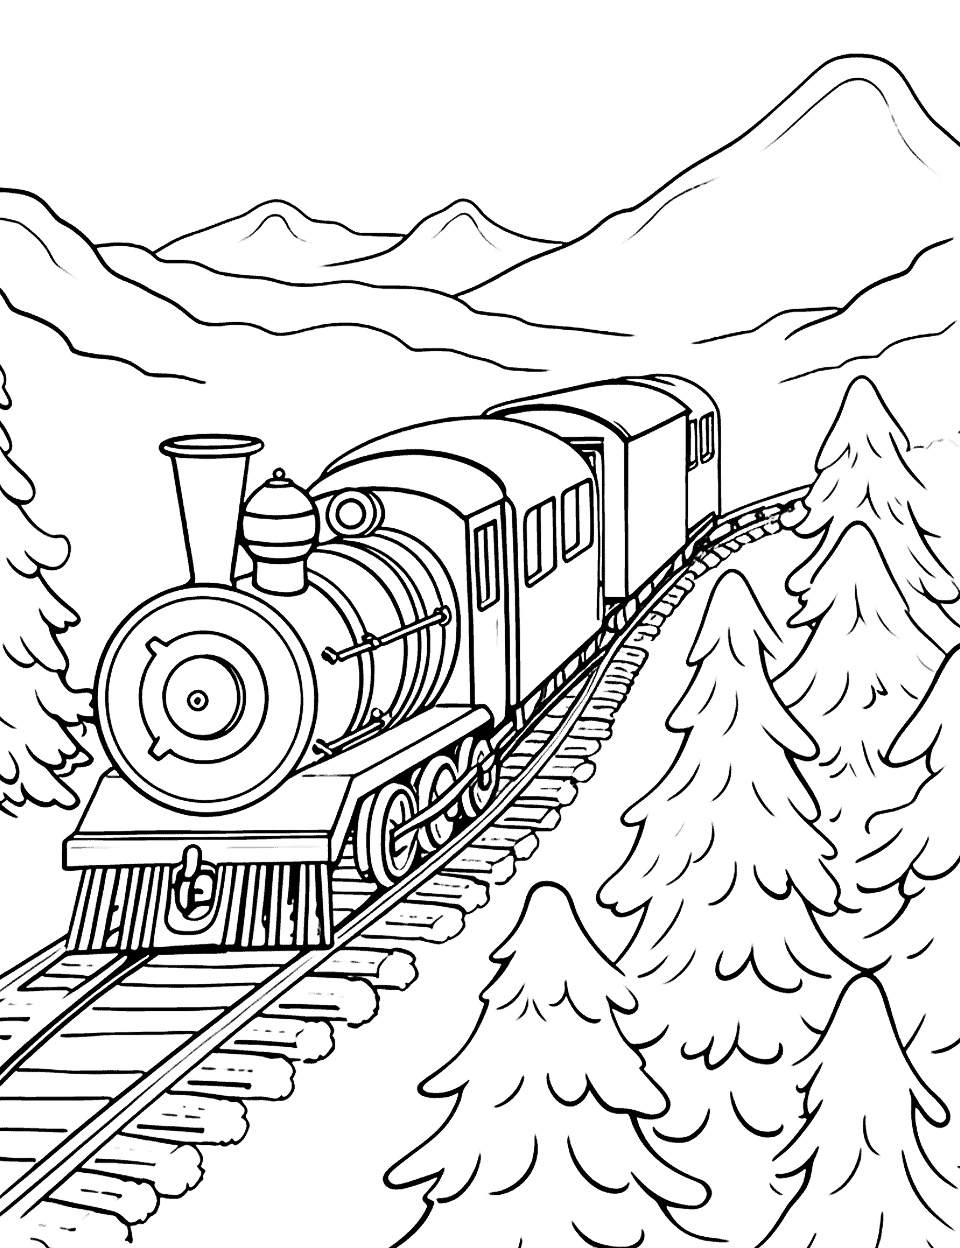 Holiday Train Ride Christmas Coloring Page - A holiday train chugging through a wintry countryside.